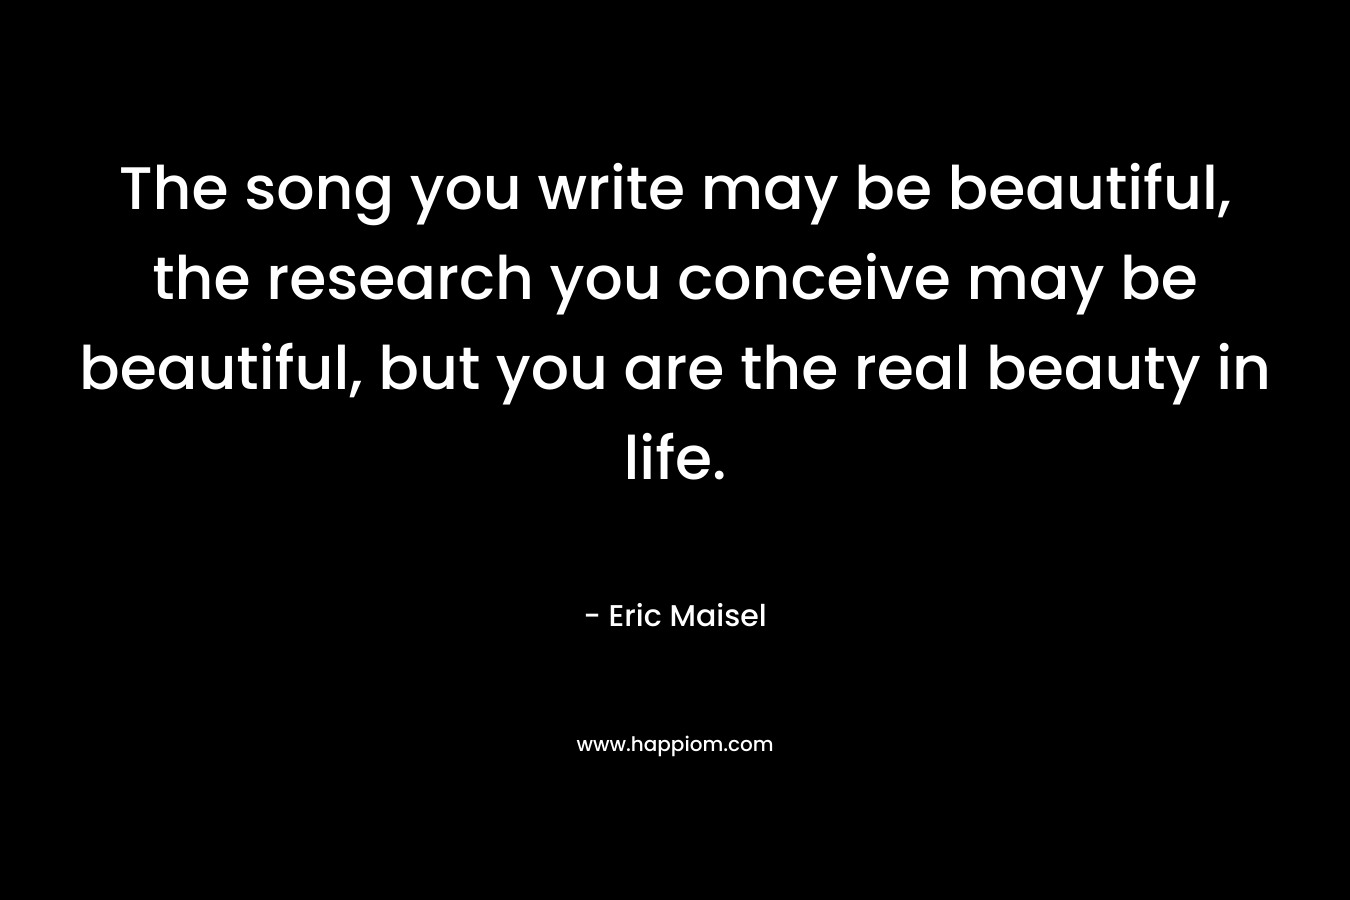 The song you write may be beautiful, the research you conceive may be beautiful, but you are the real beauty in life. – Eric Maisel